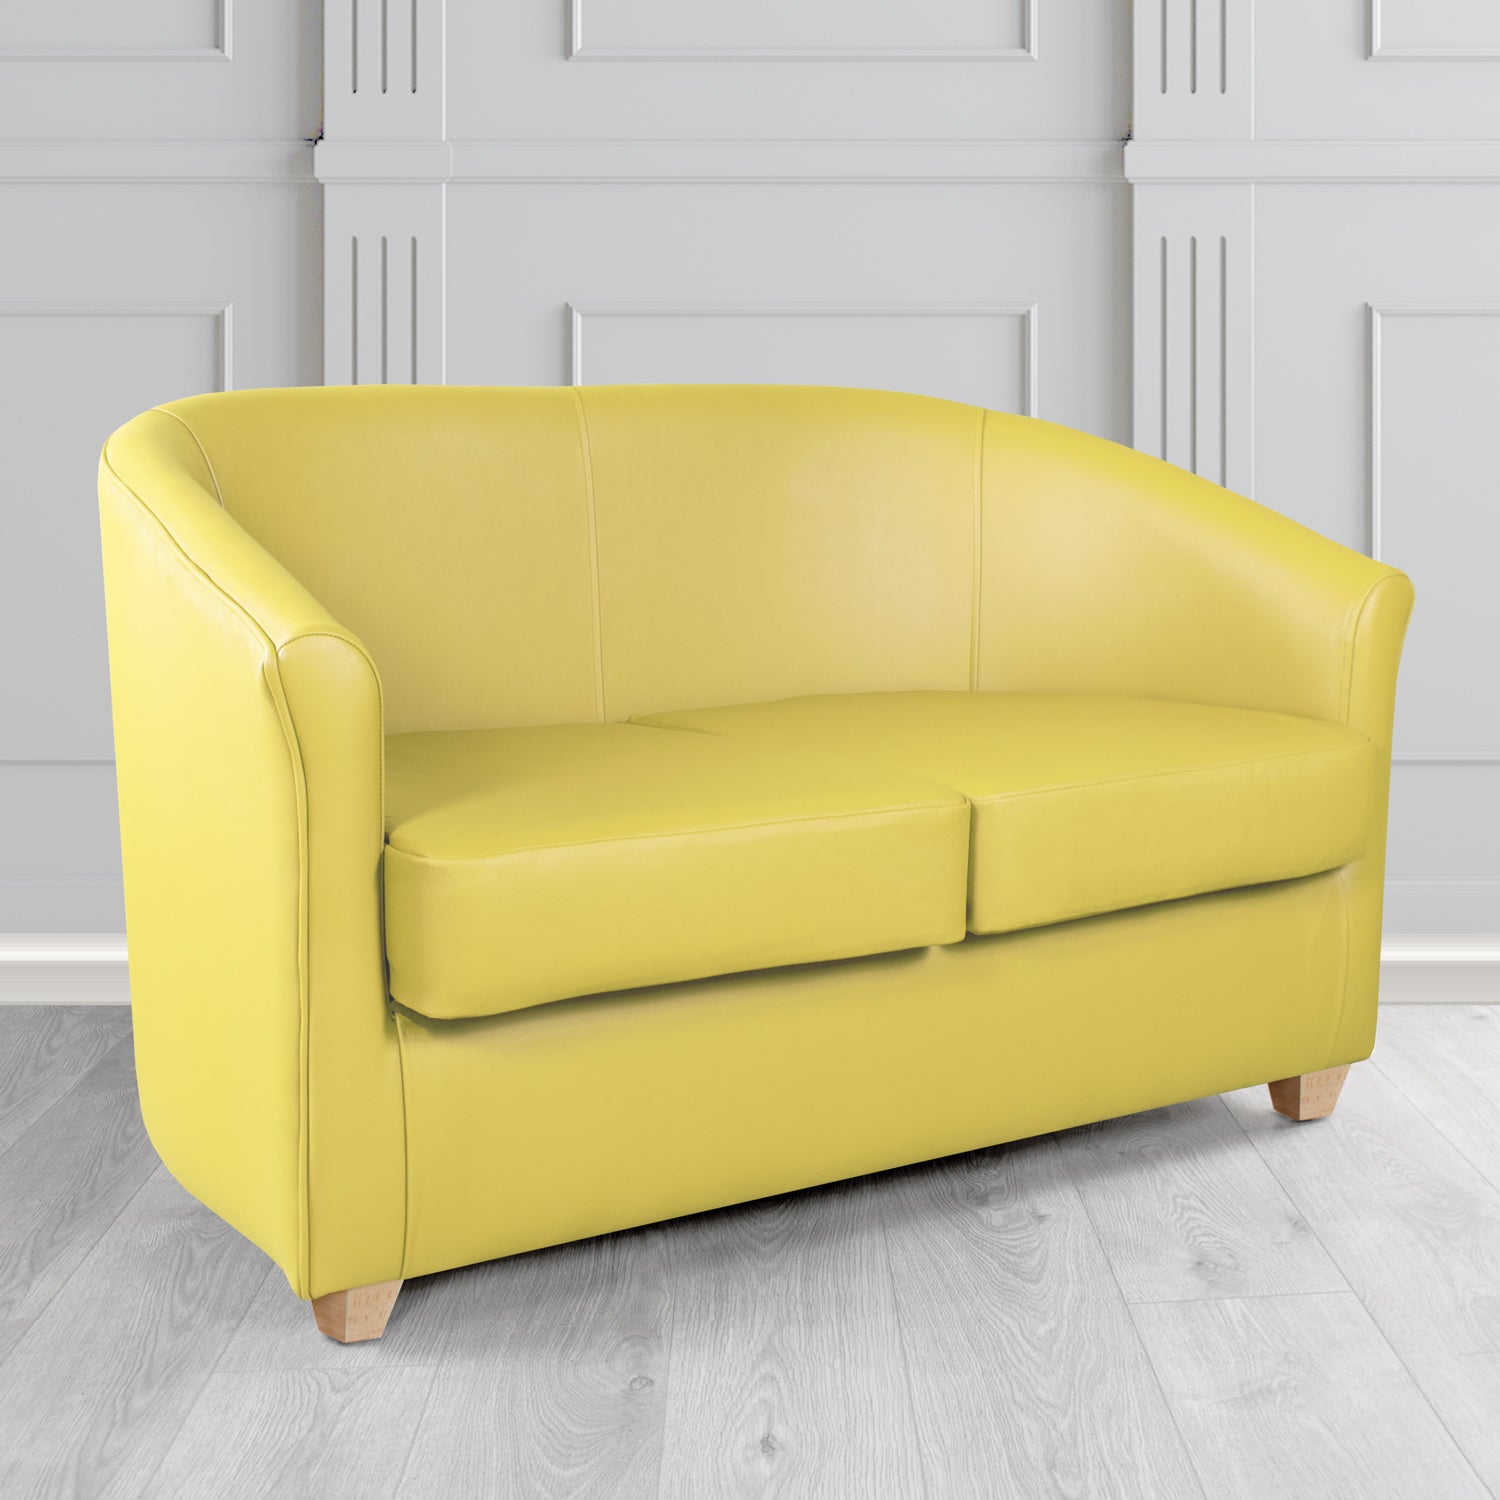 Cannes 2 Seater Tub Sofa in Just Colour Primrose Crib 5 Faux Leather - The Tub Chair Shop